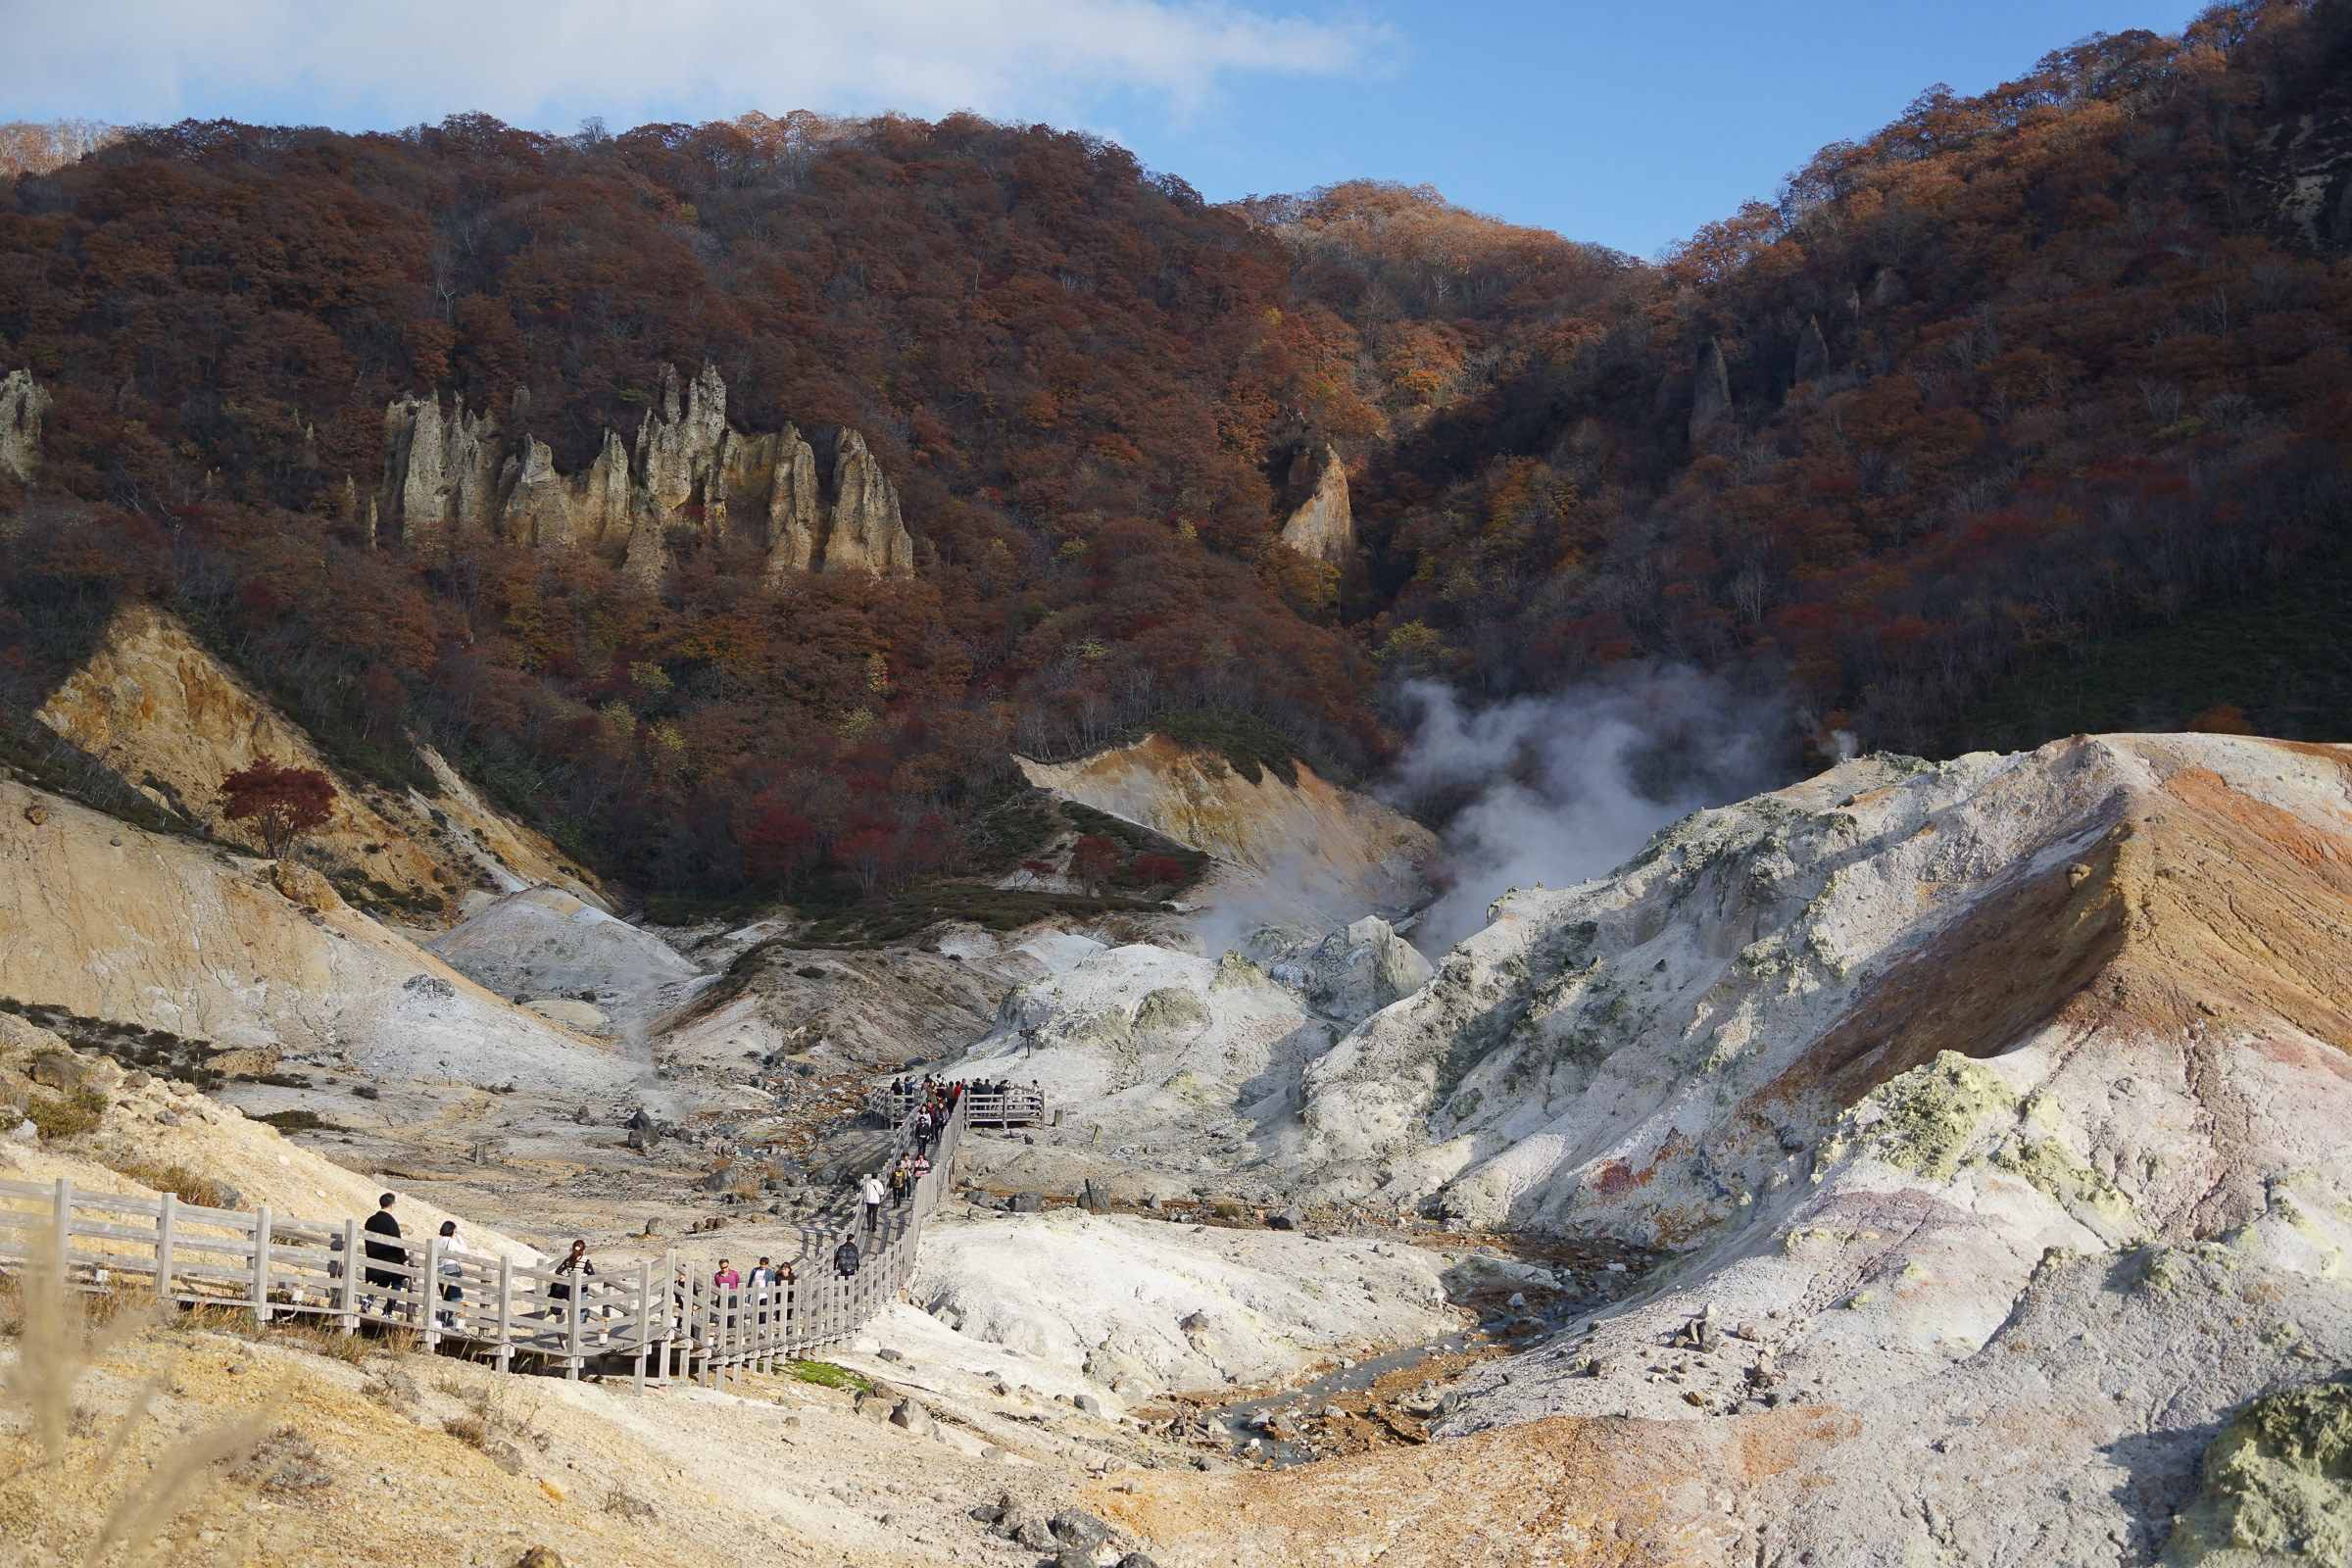 A view into Noboribetsu Hell Valley. A wooden walkway takes hikers down into the valley, steam from volcanic vents rising all around. The landscape looks sandy and rocky.